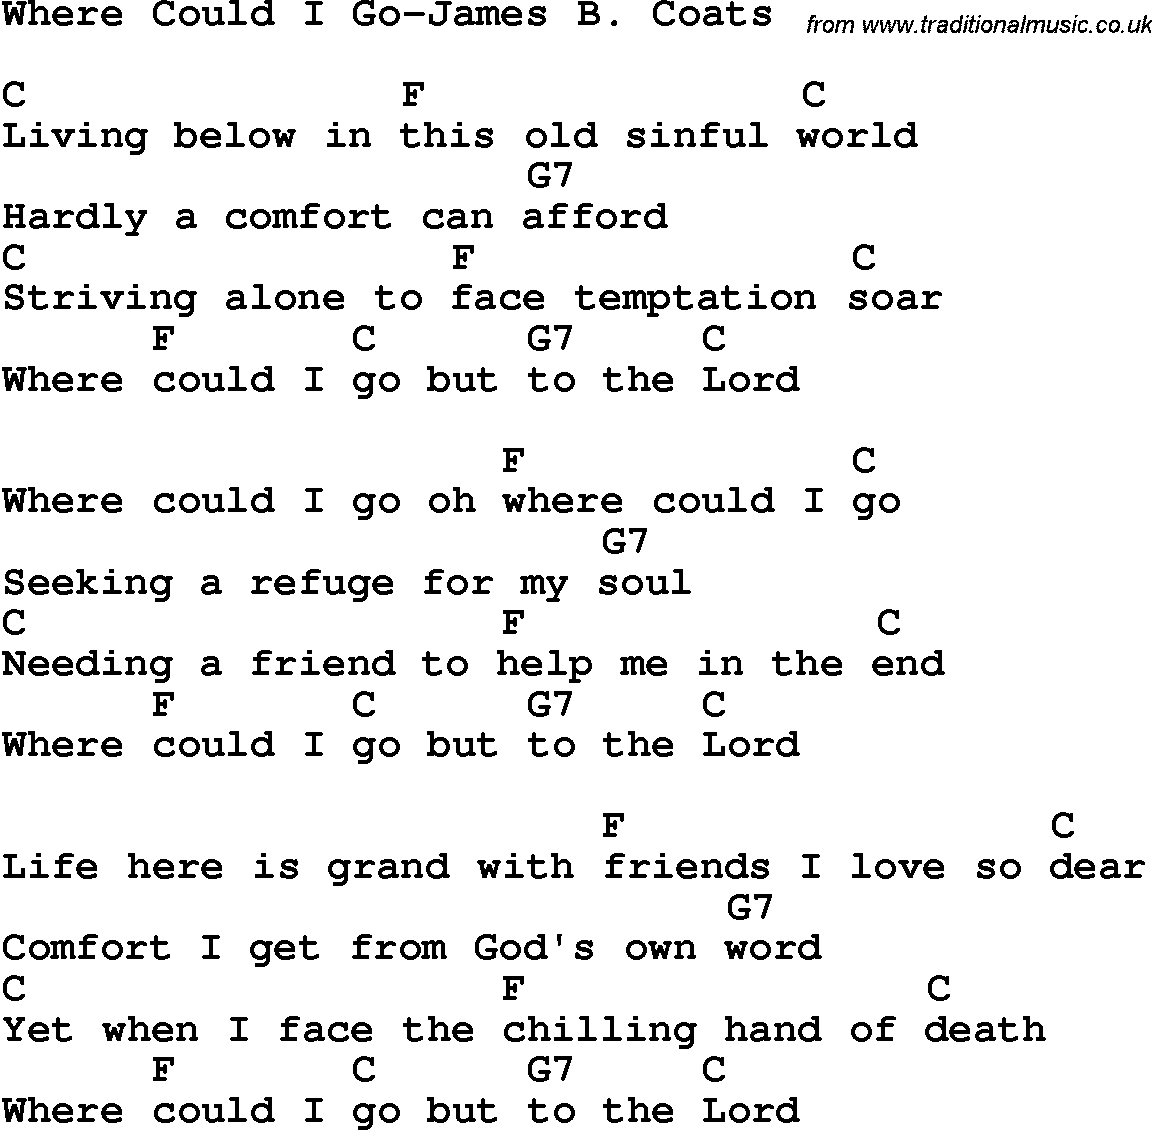 Country, Southern and Bluegrass Gospel Song Where Could I Go-James B Coats lyrics and chords